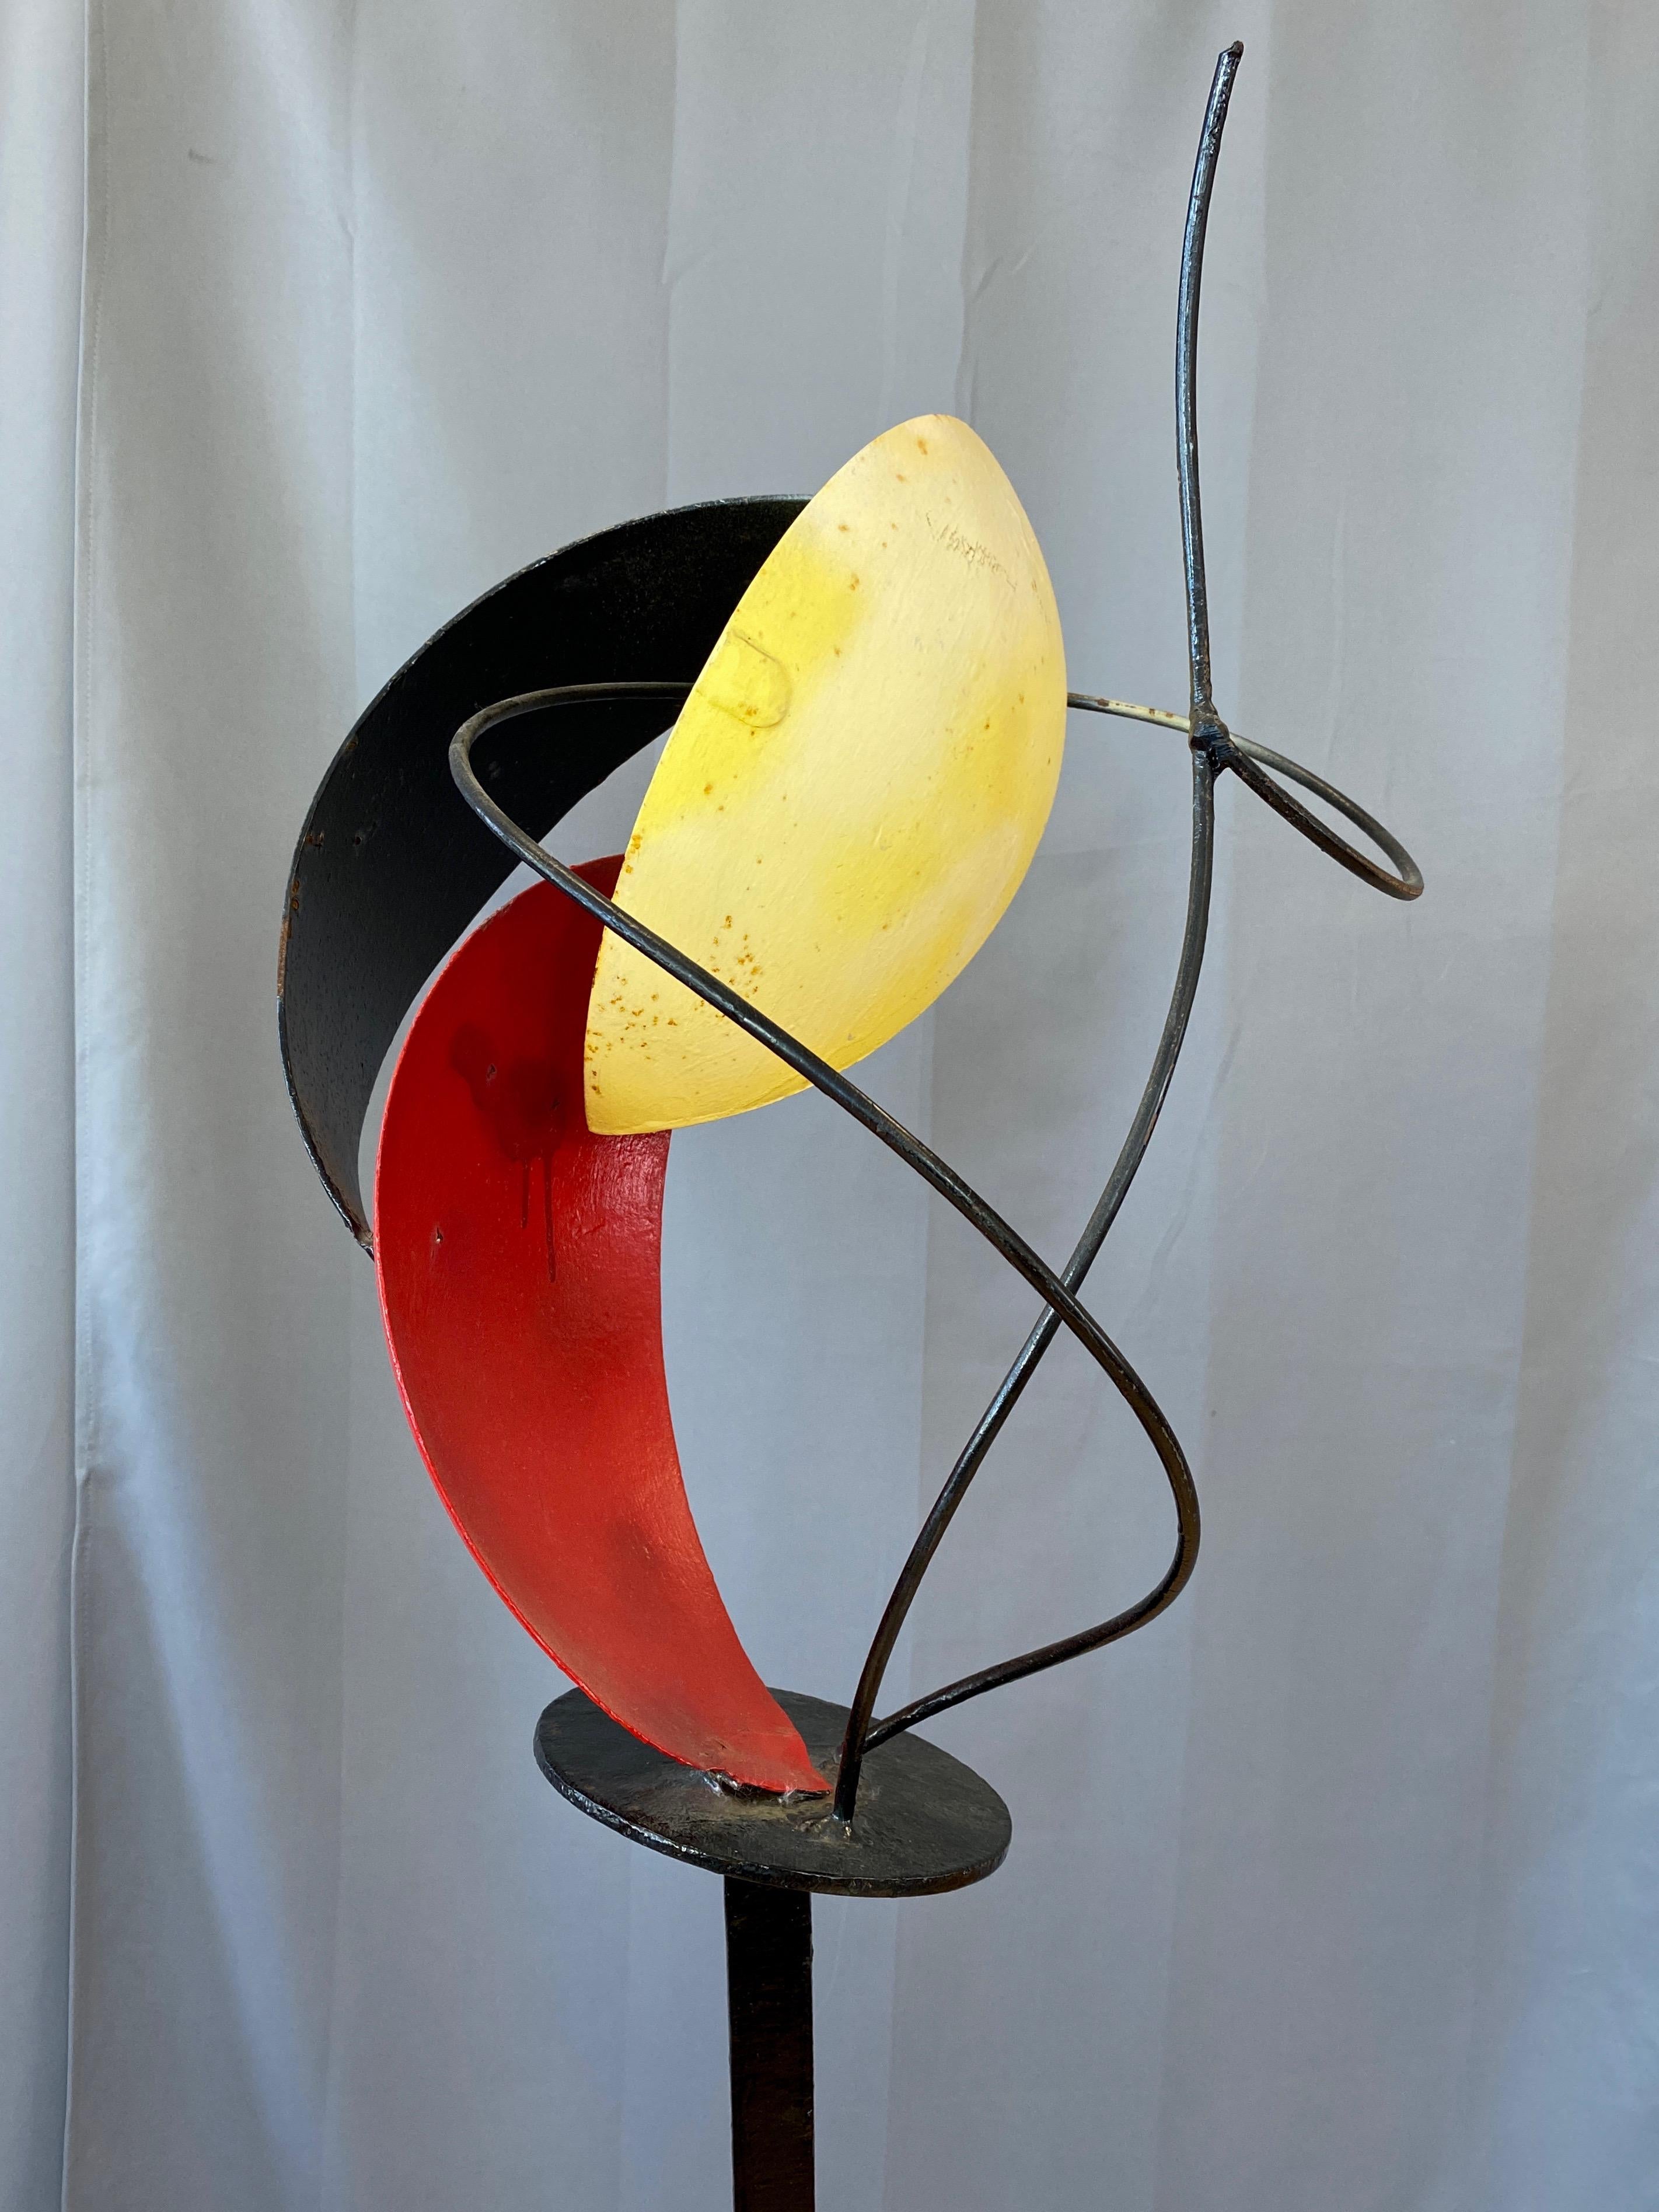 Béla Harcos Tall Abstract Expressionist Enameled Steel Sculpture, Late 1990s For Sale 4